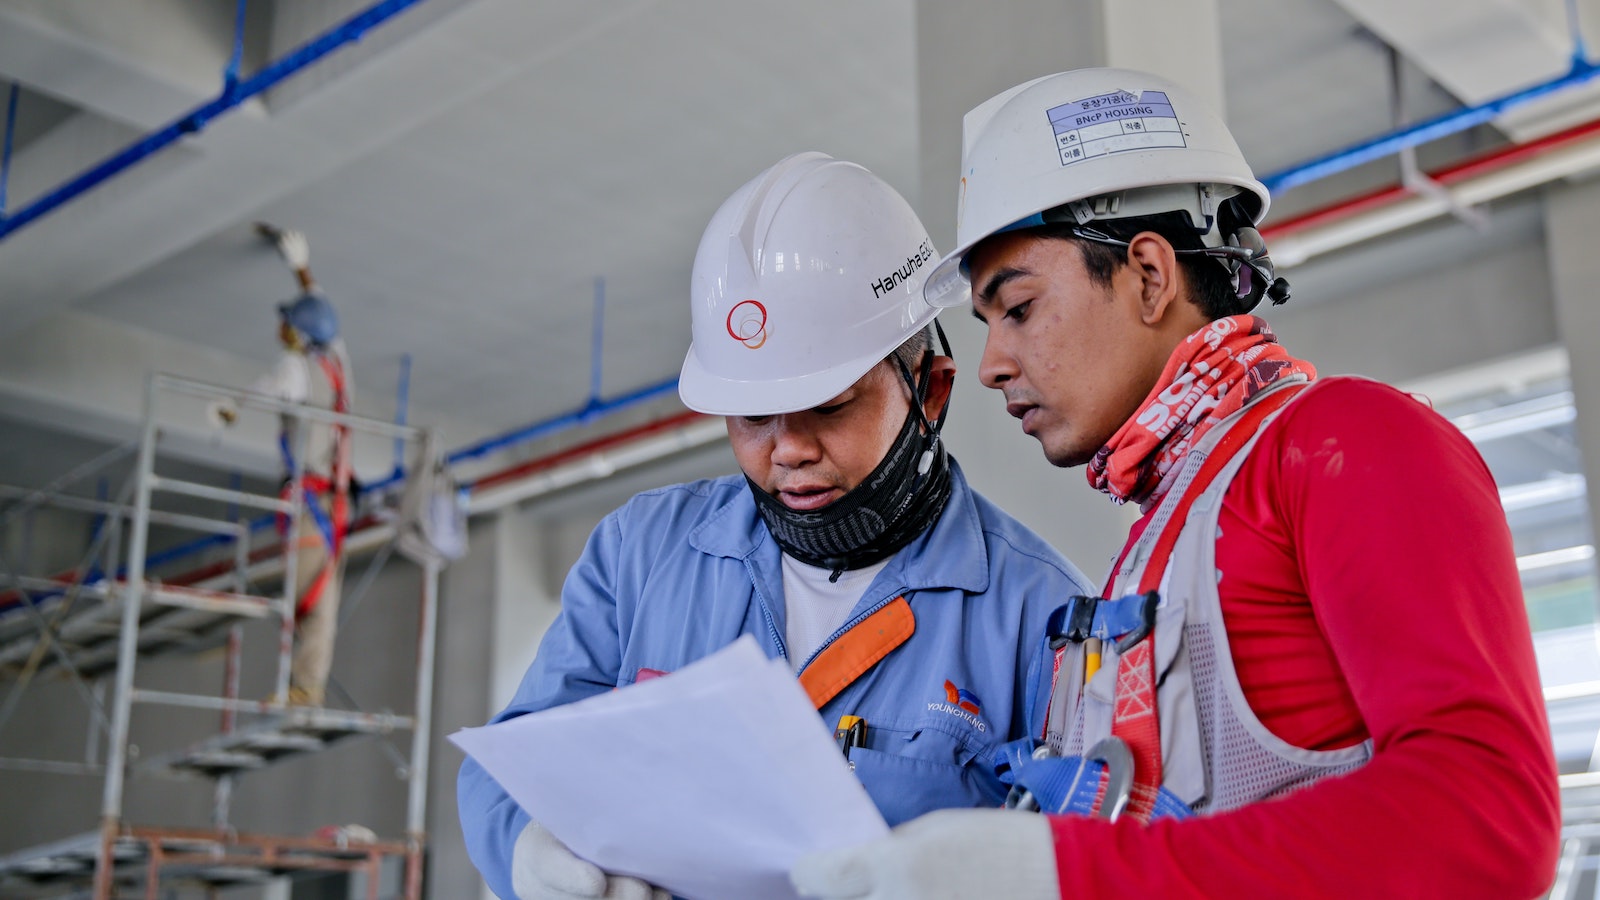 Two people in hard hats looking at a sheet of paper